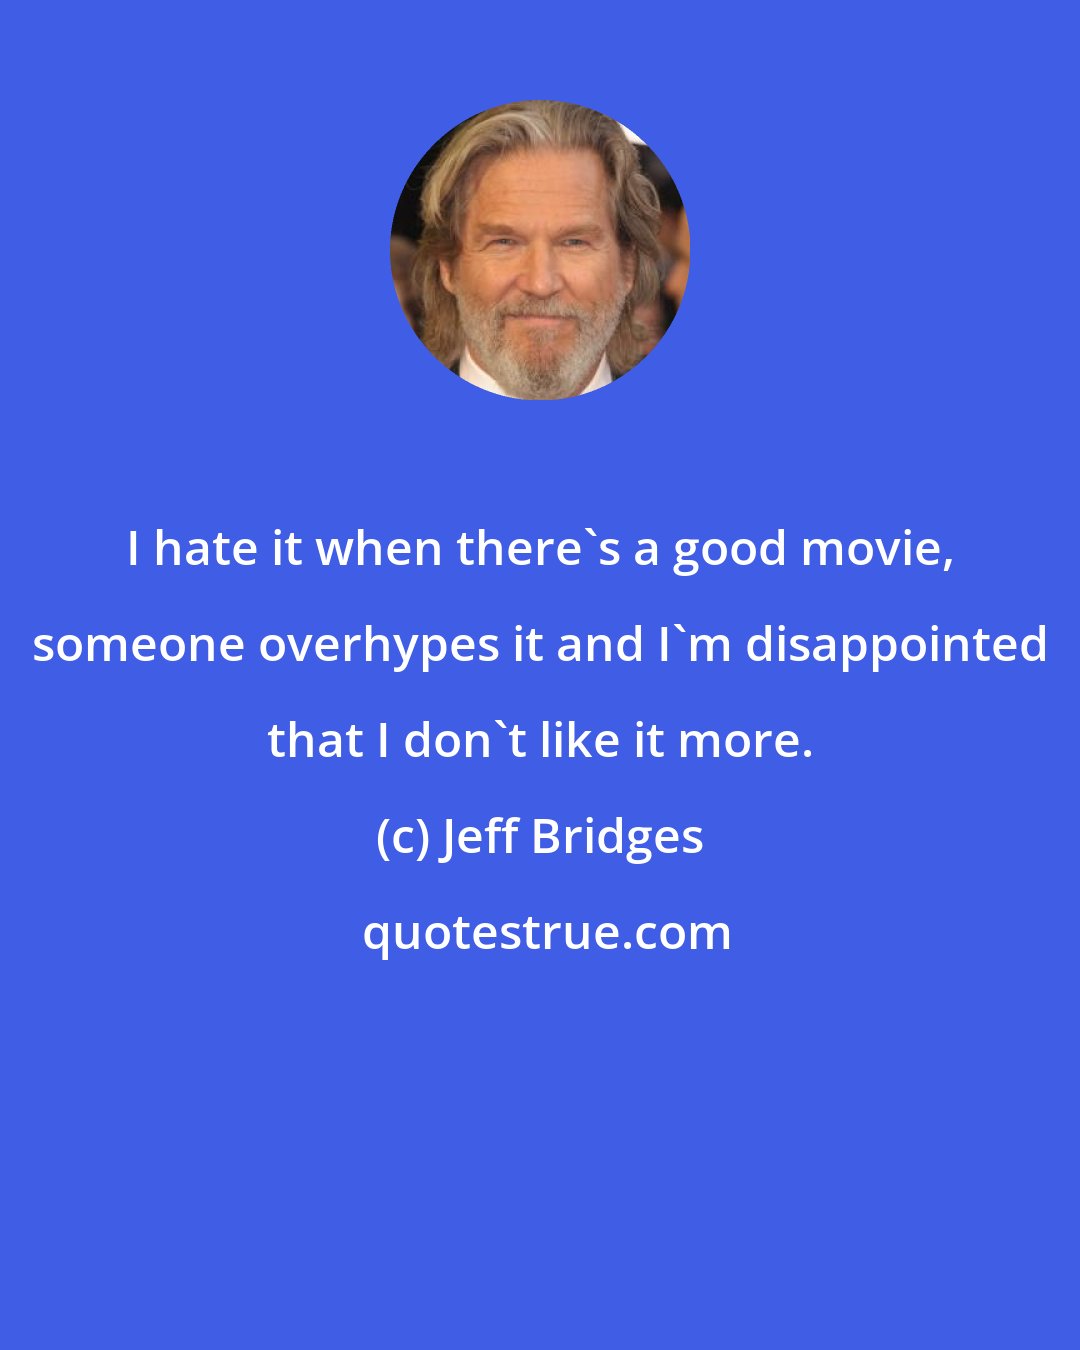 Jeff Bridges: I hate it when there's a good movie, someone overhypes it and I'm disappointed that I don't like it more.